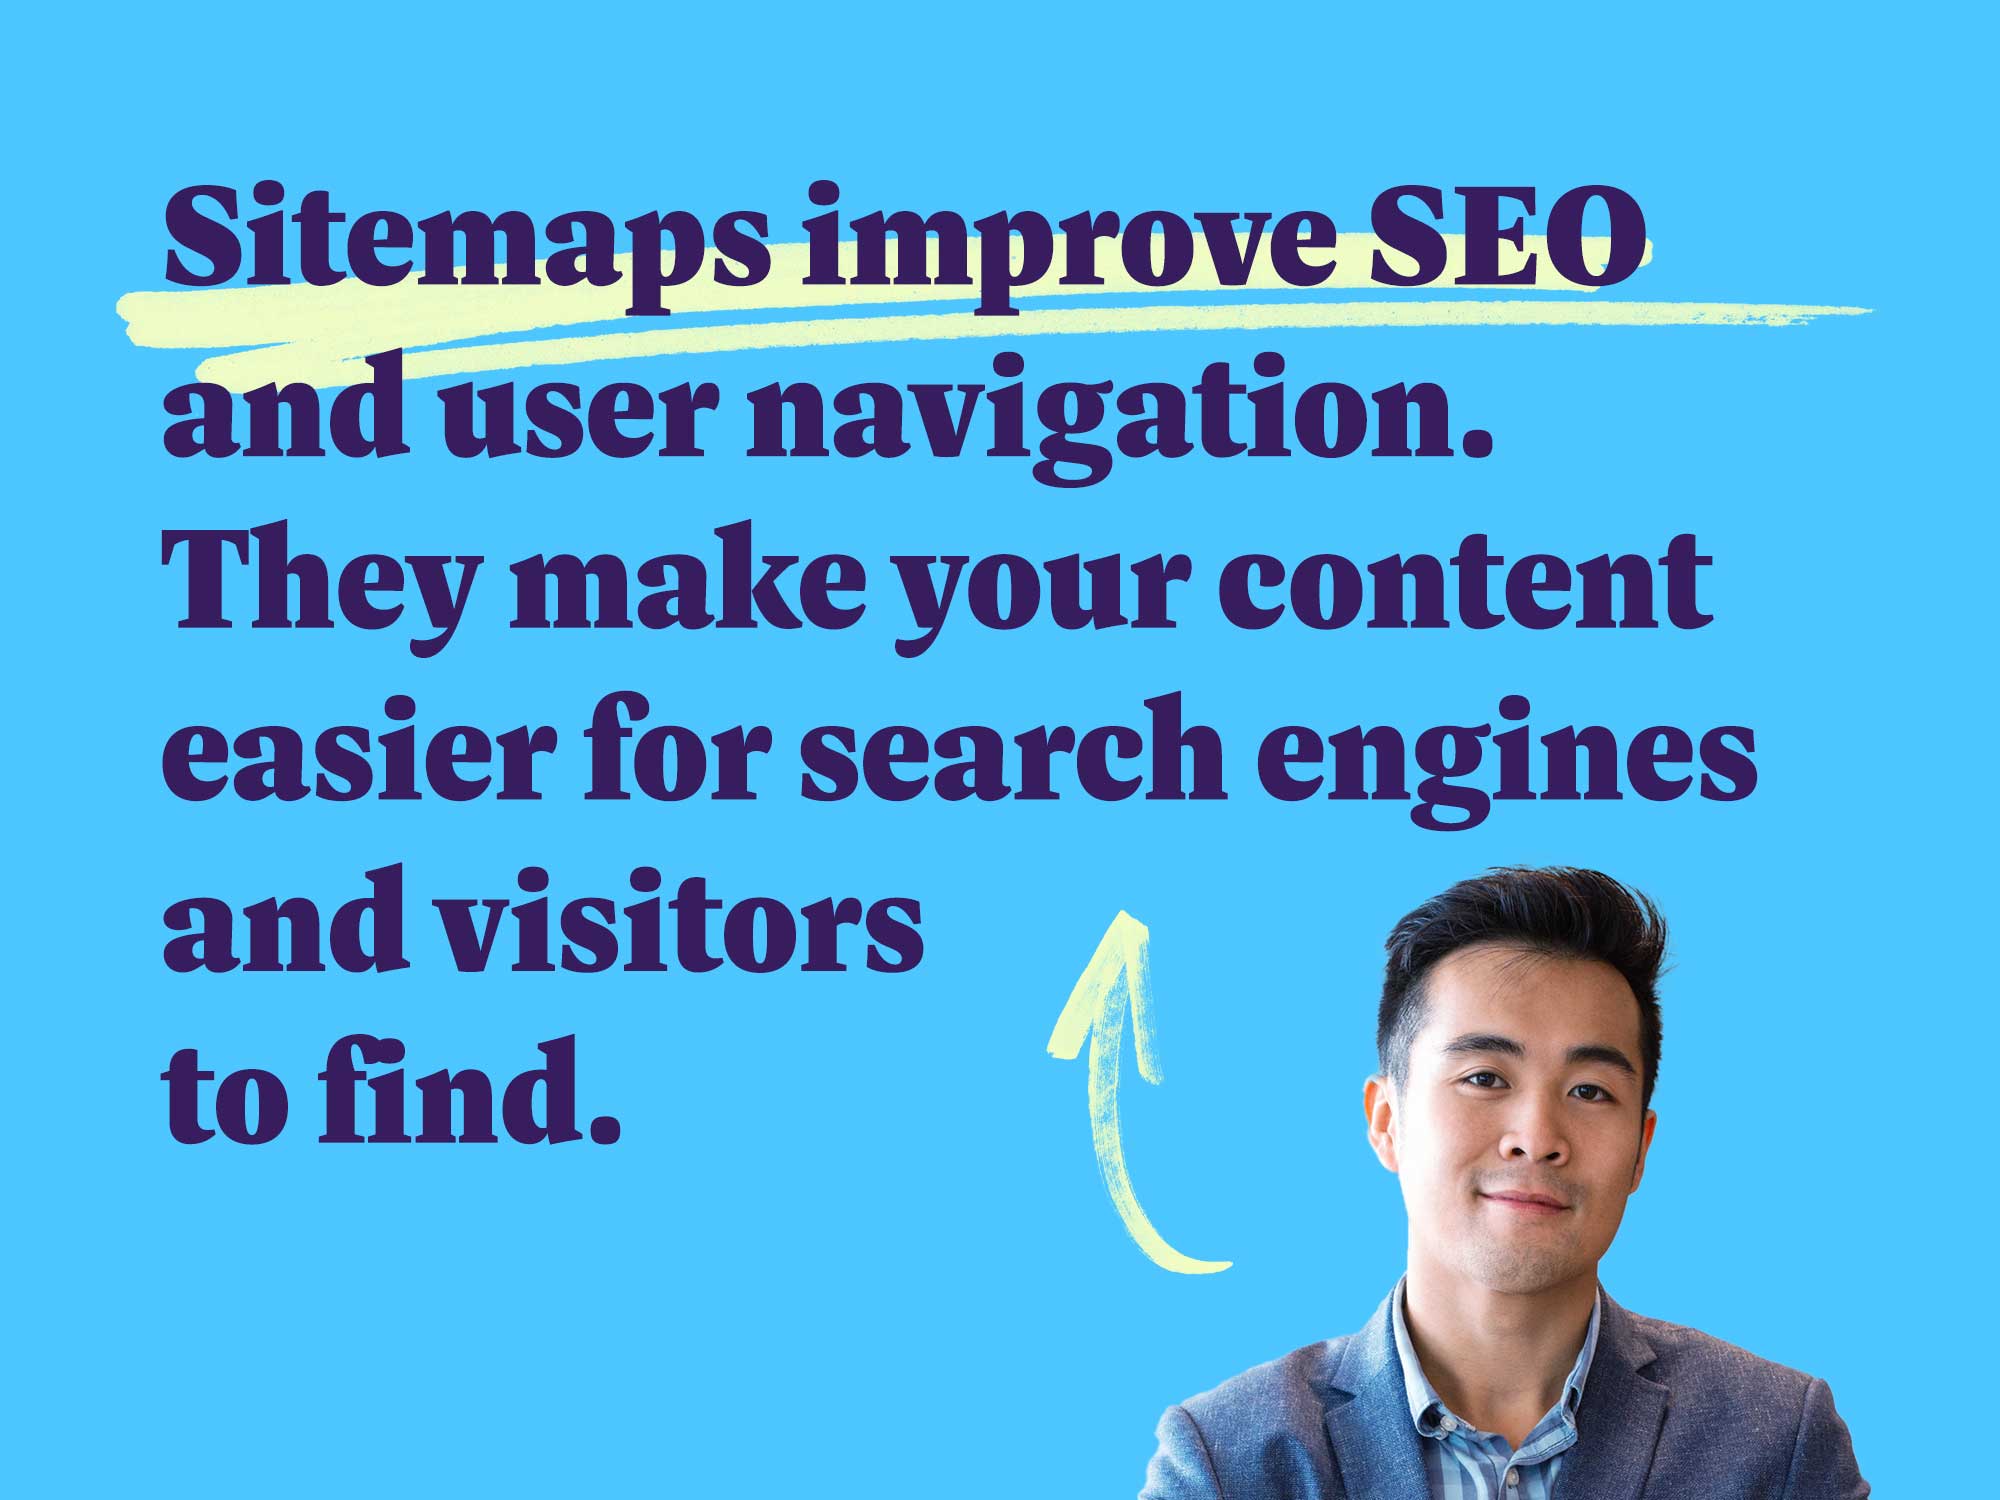 Sitemaps improve SEO and user navigation. They make your content easier for search engines and visitors to find.